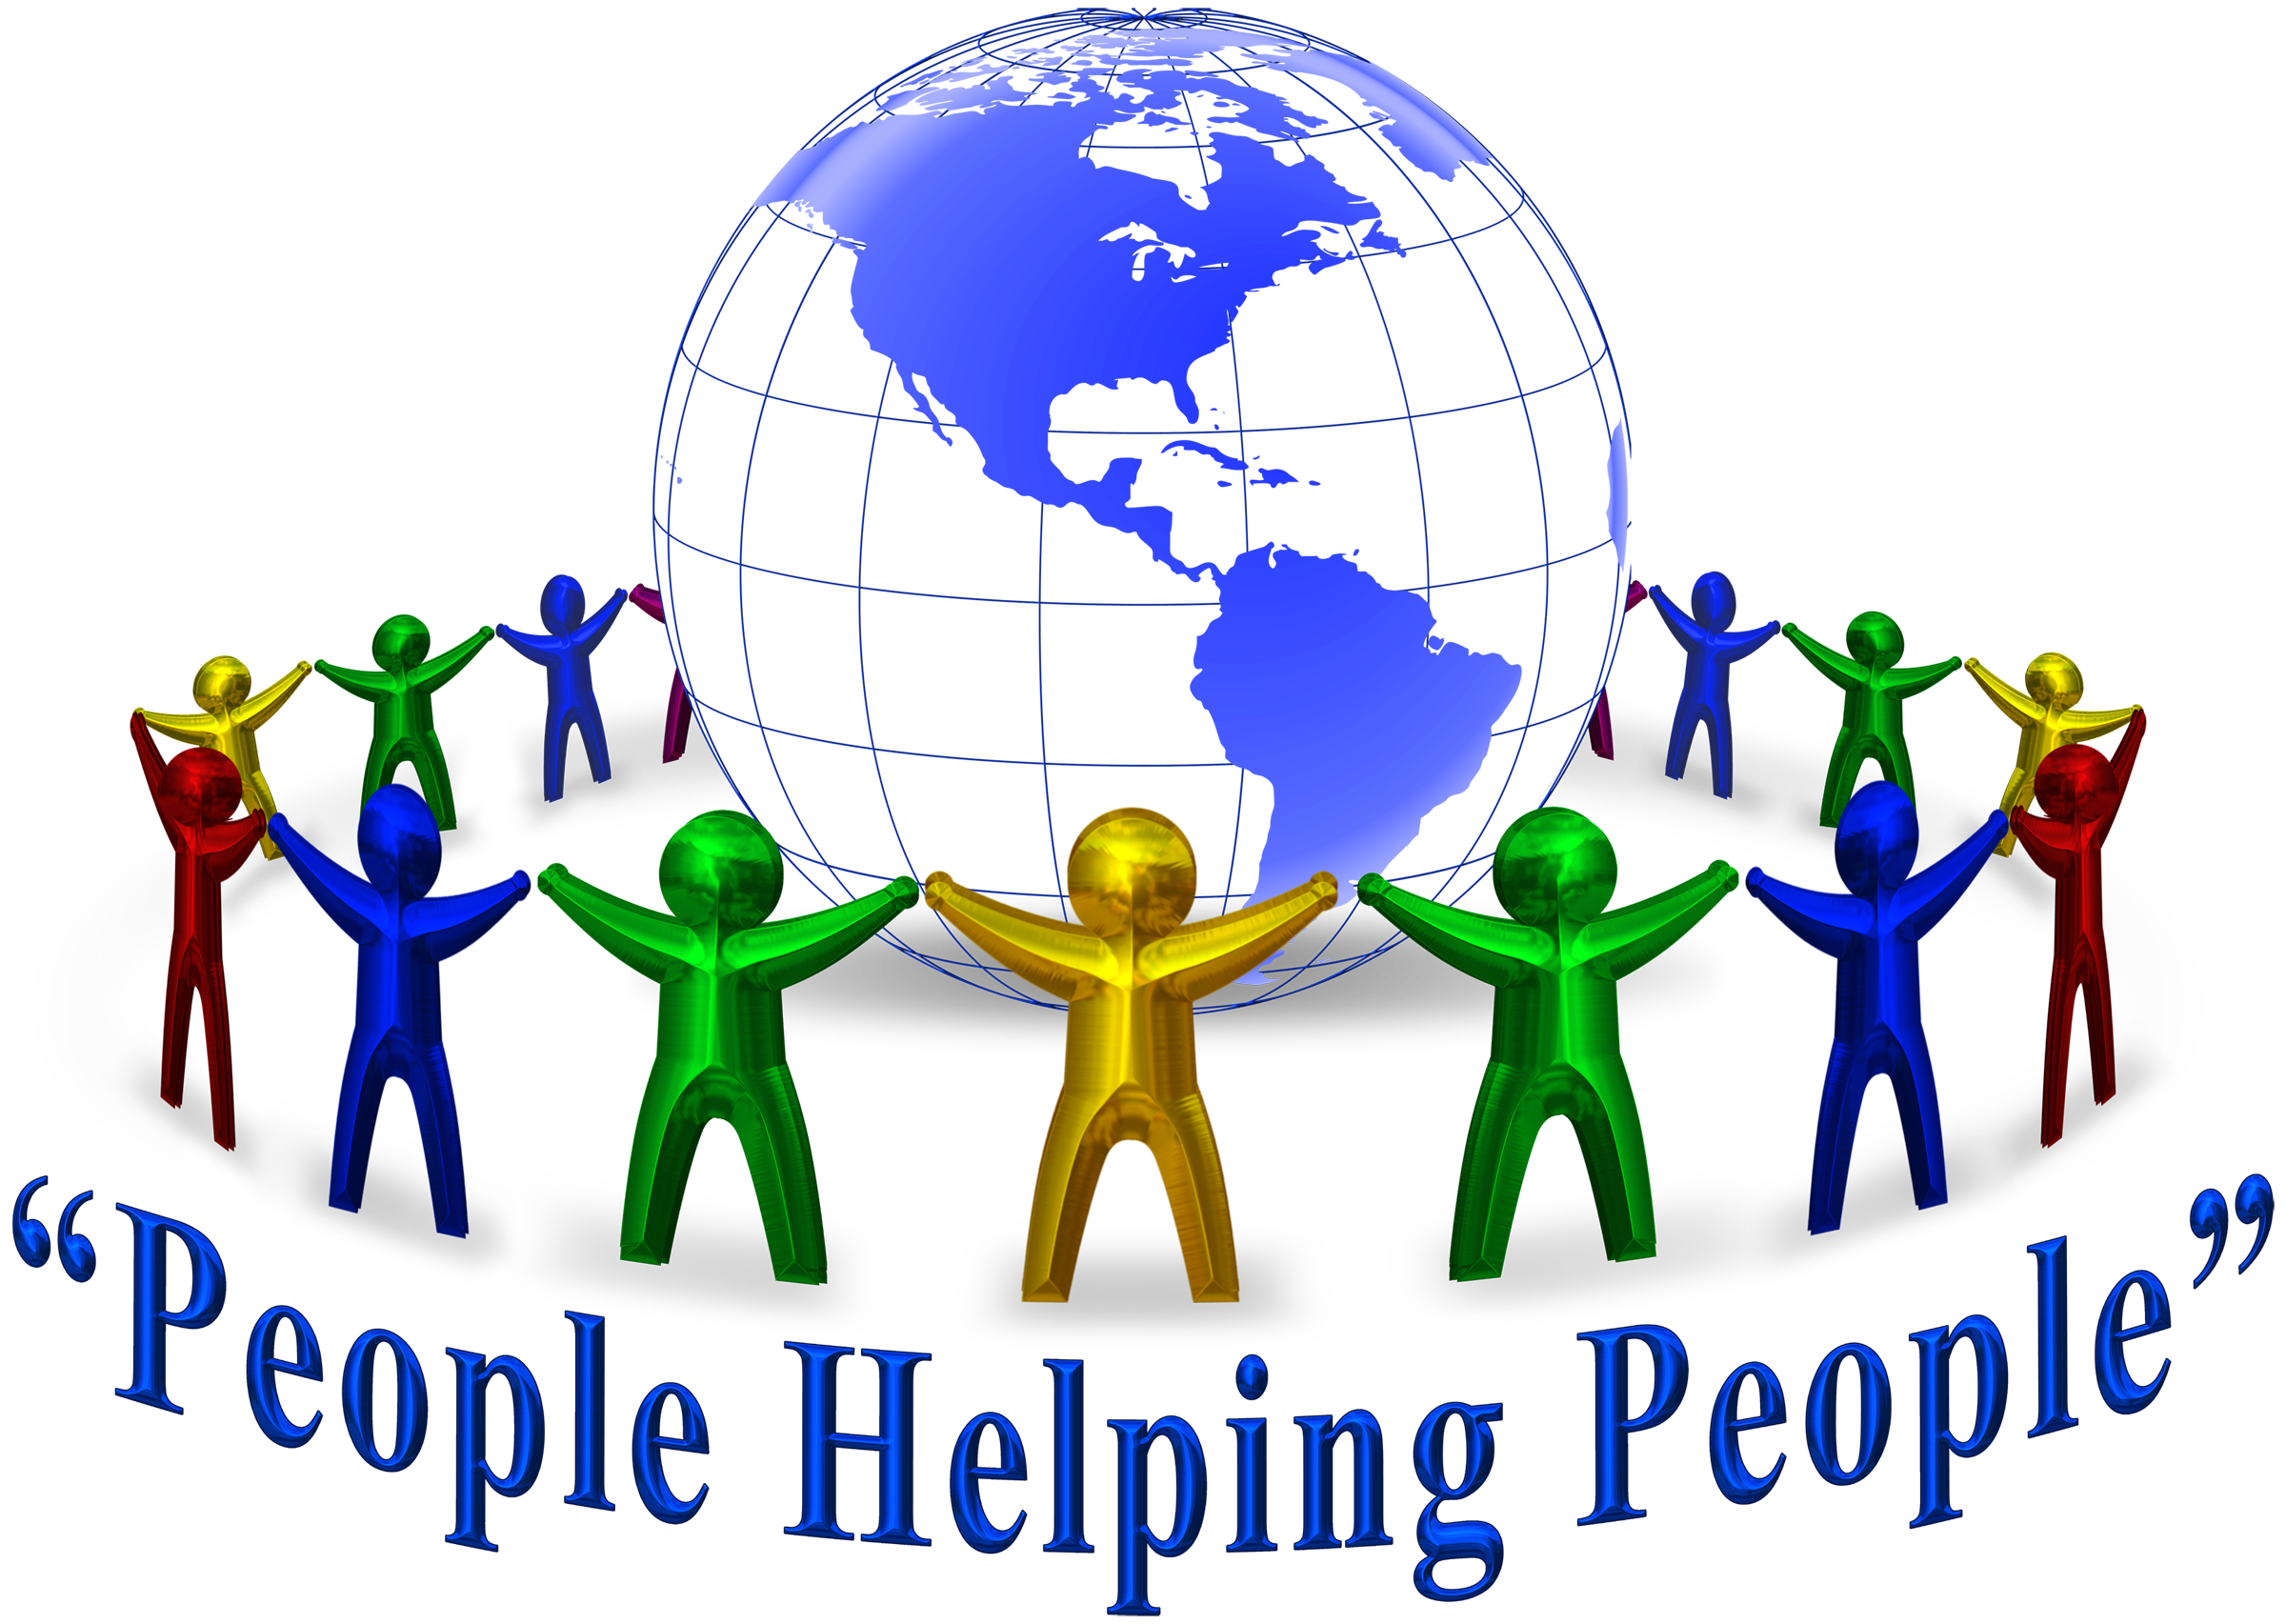 Images for people helping. Volunteering clipart person